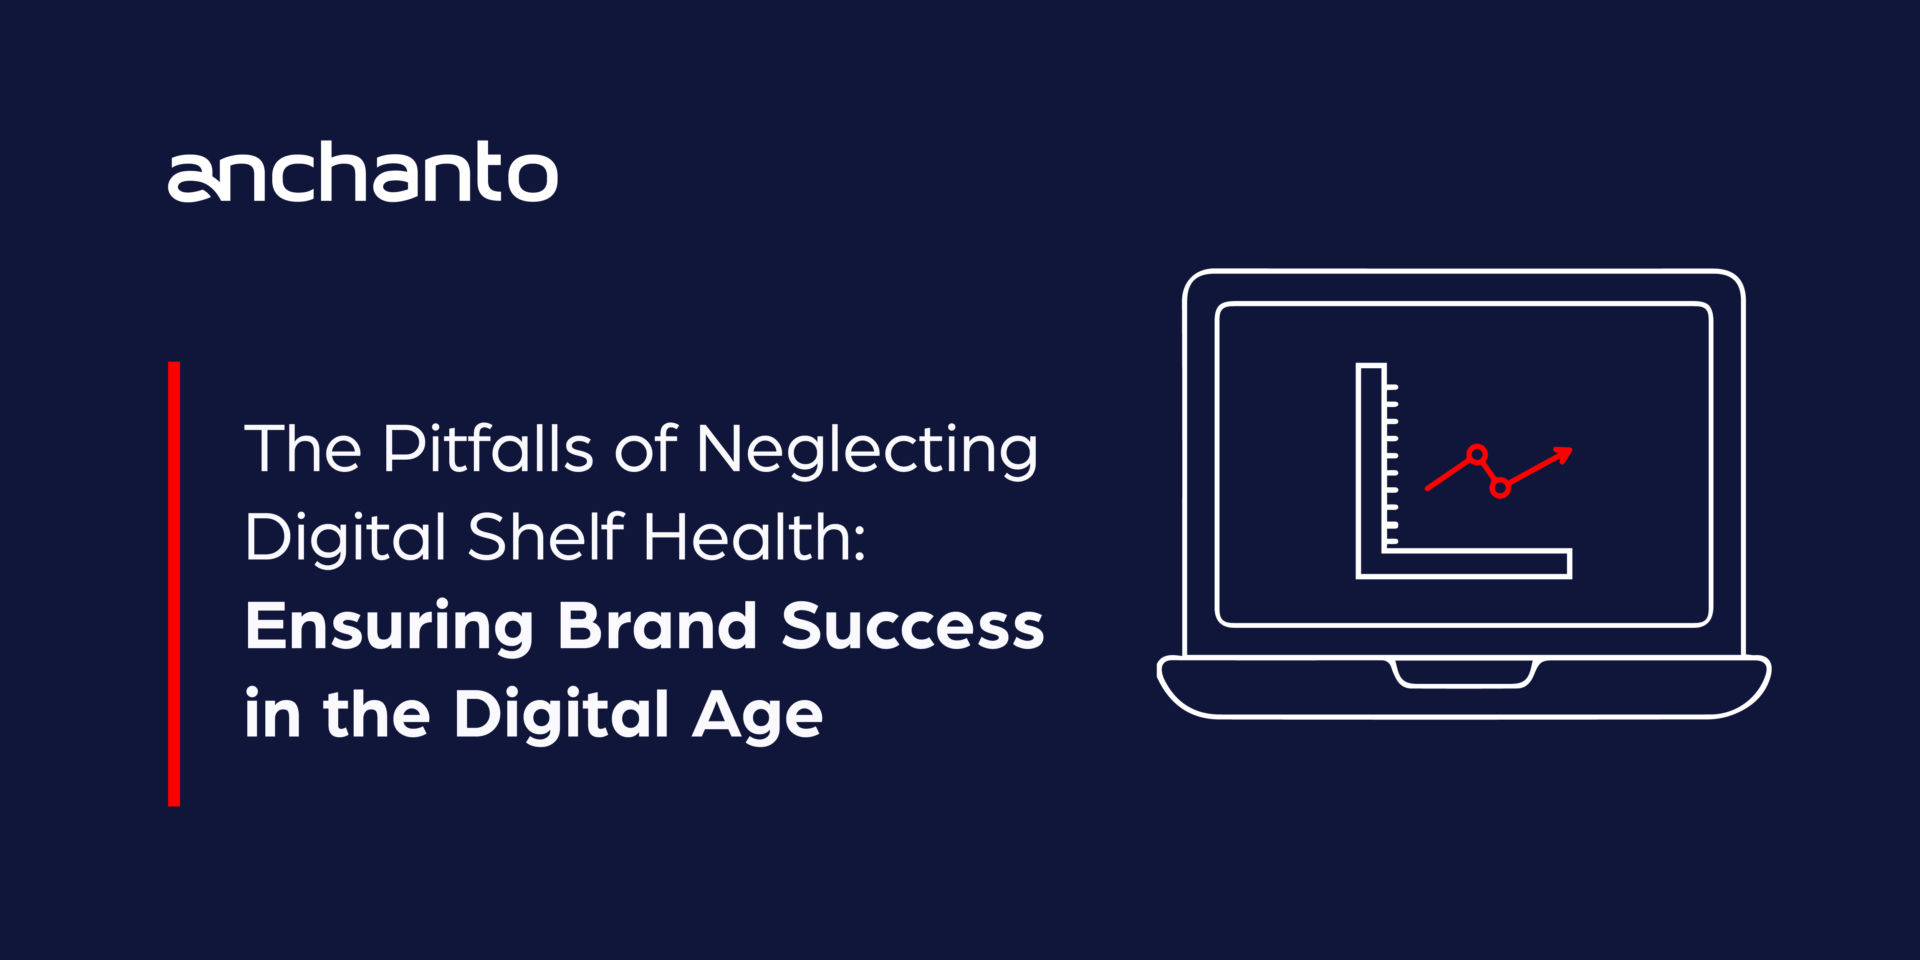 The Pitfalls of Neglecting Digital Shelf Health: Ensuring Brand Success in the Digital Age